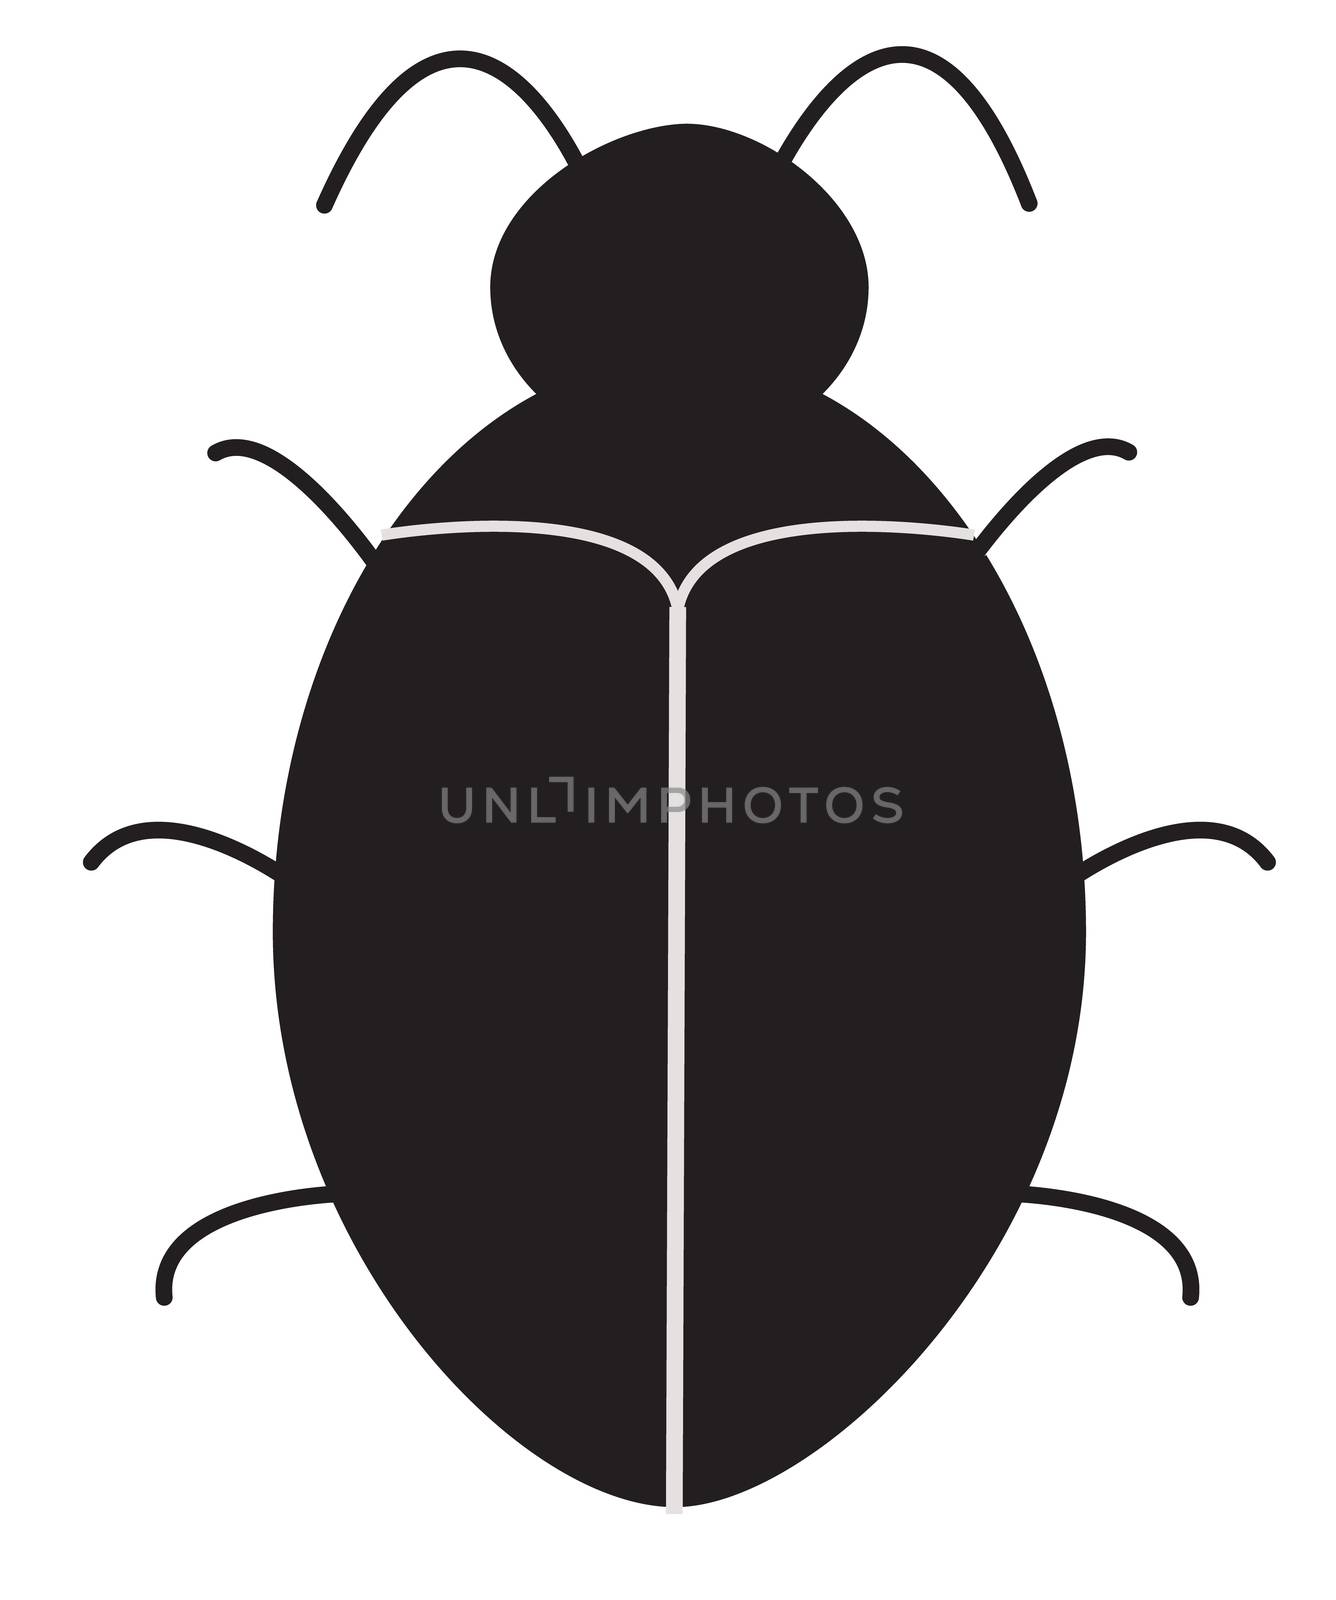 bug software. bug icon on white background. software bug or program bug icon for app and website.